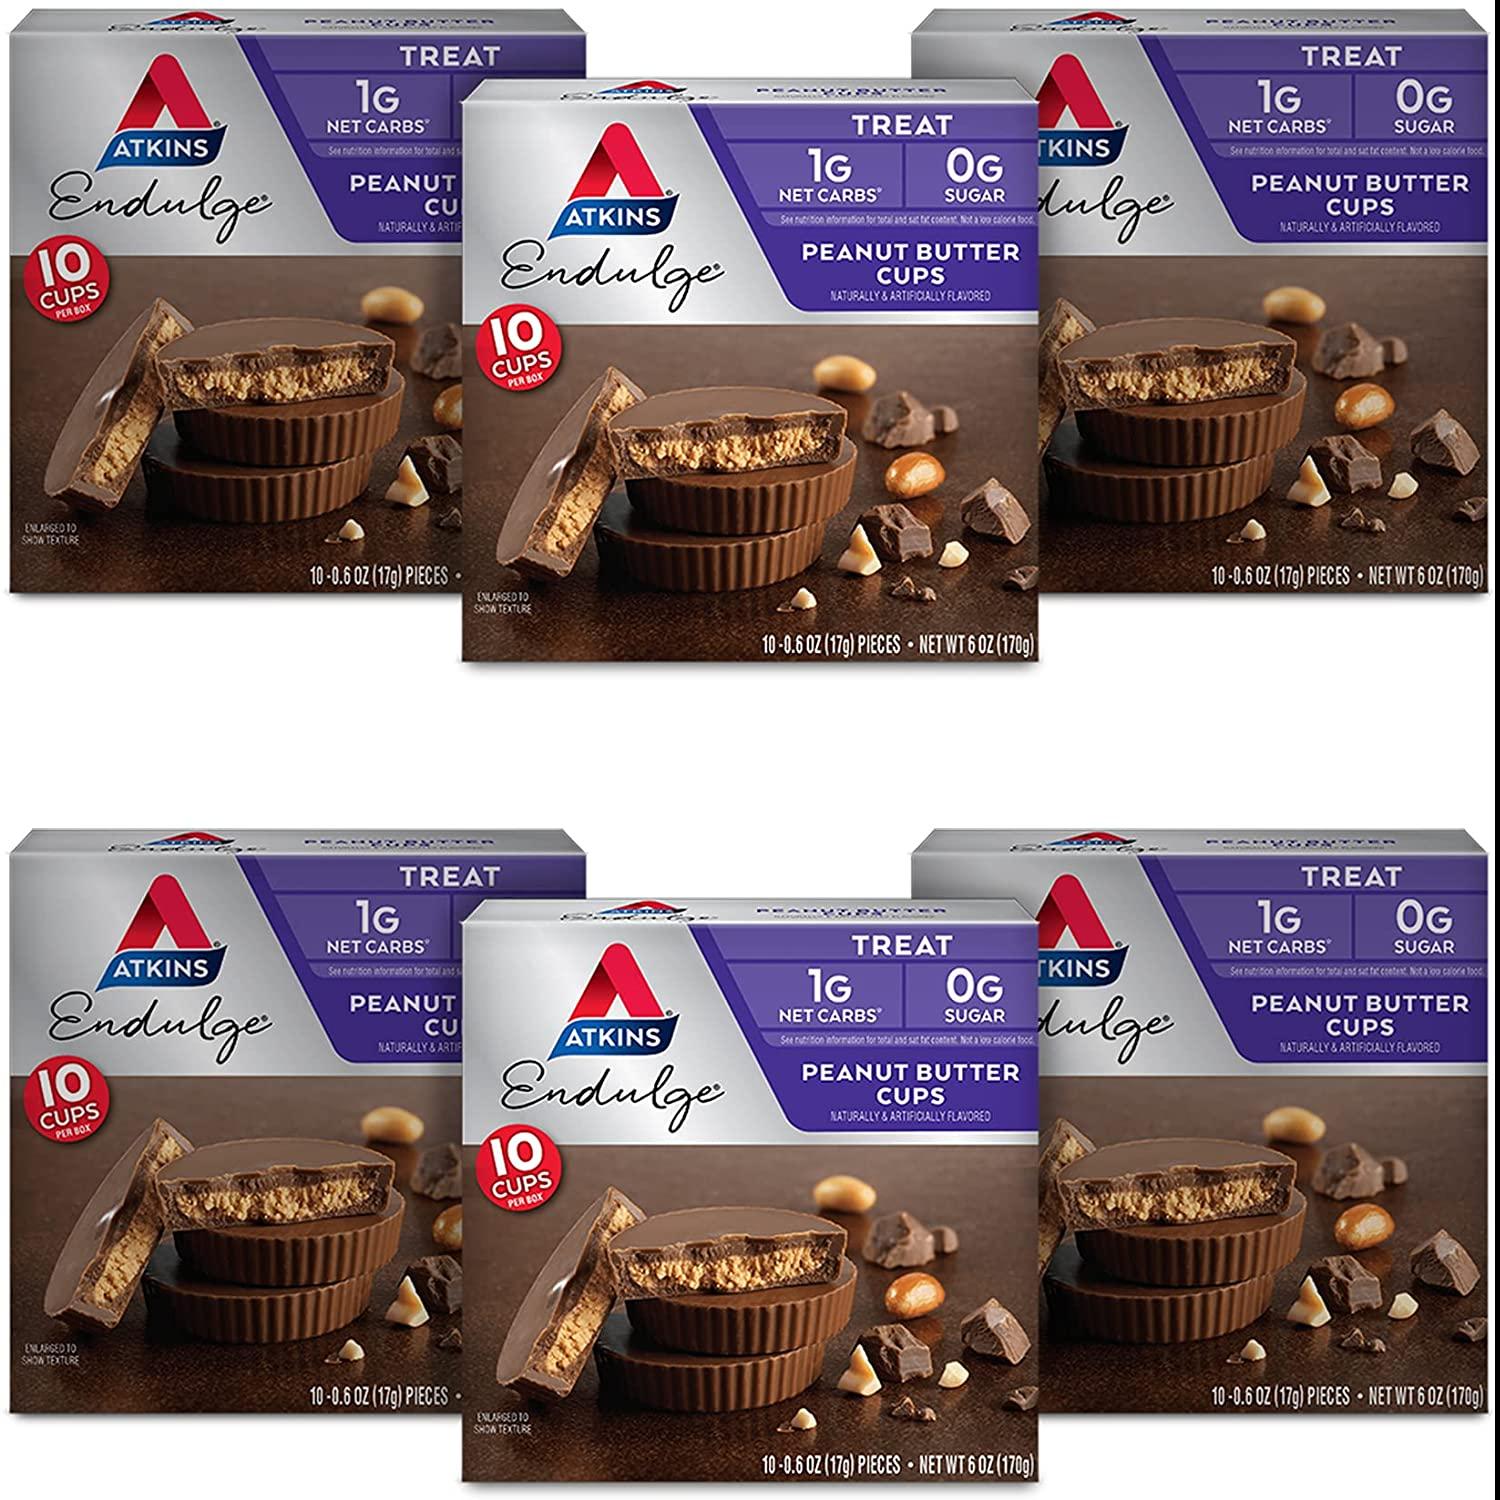 60 Atkins Endulge Treat Peanut Butter Cups for $12.39 Shipped